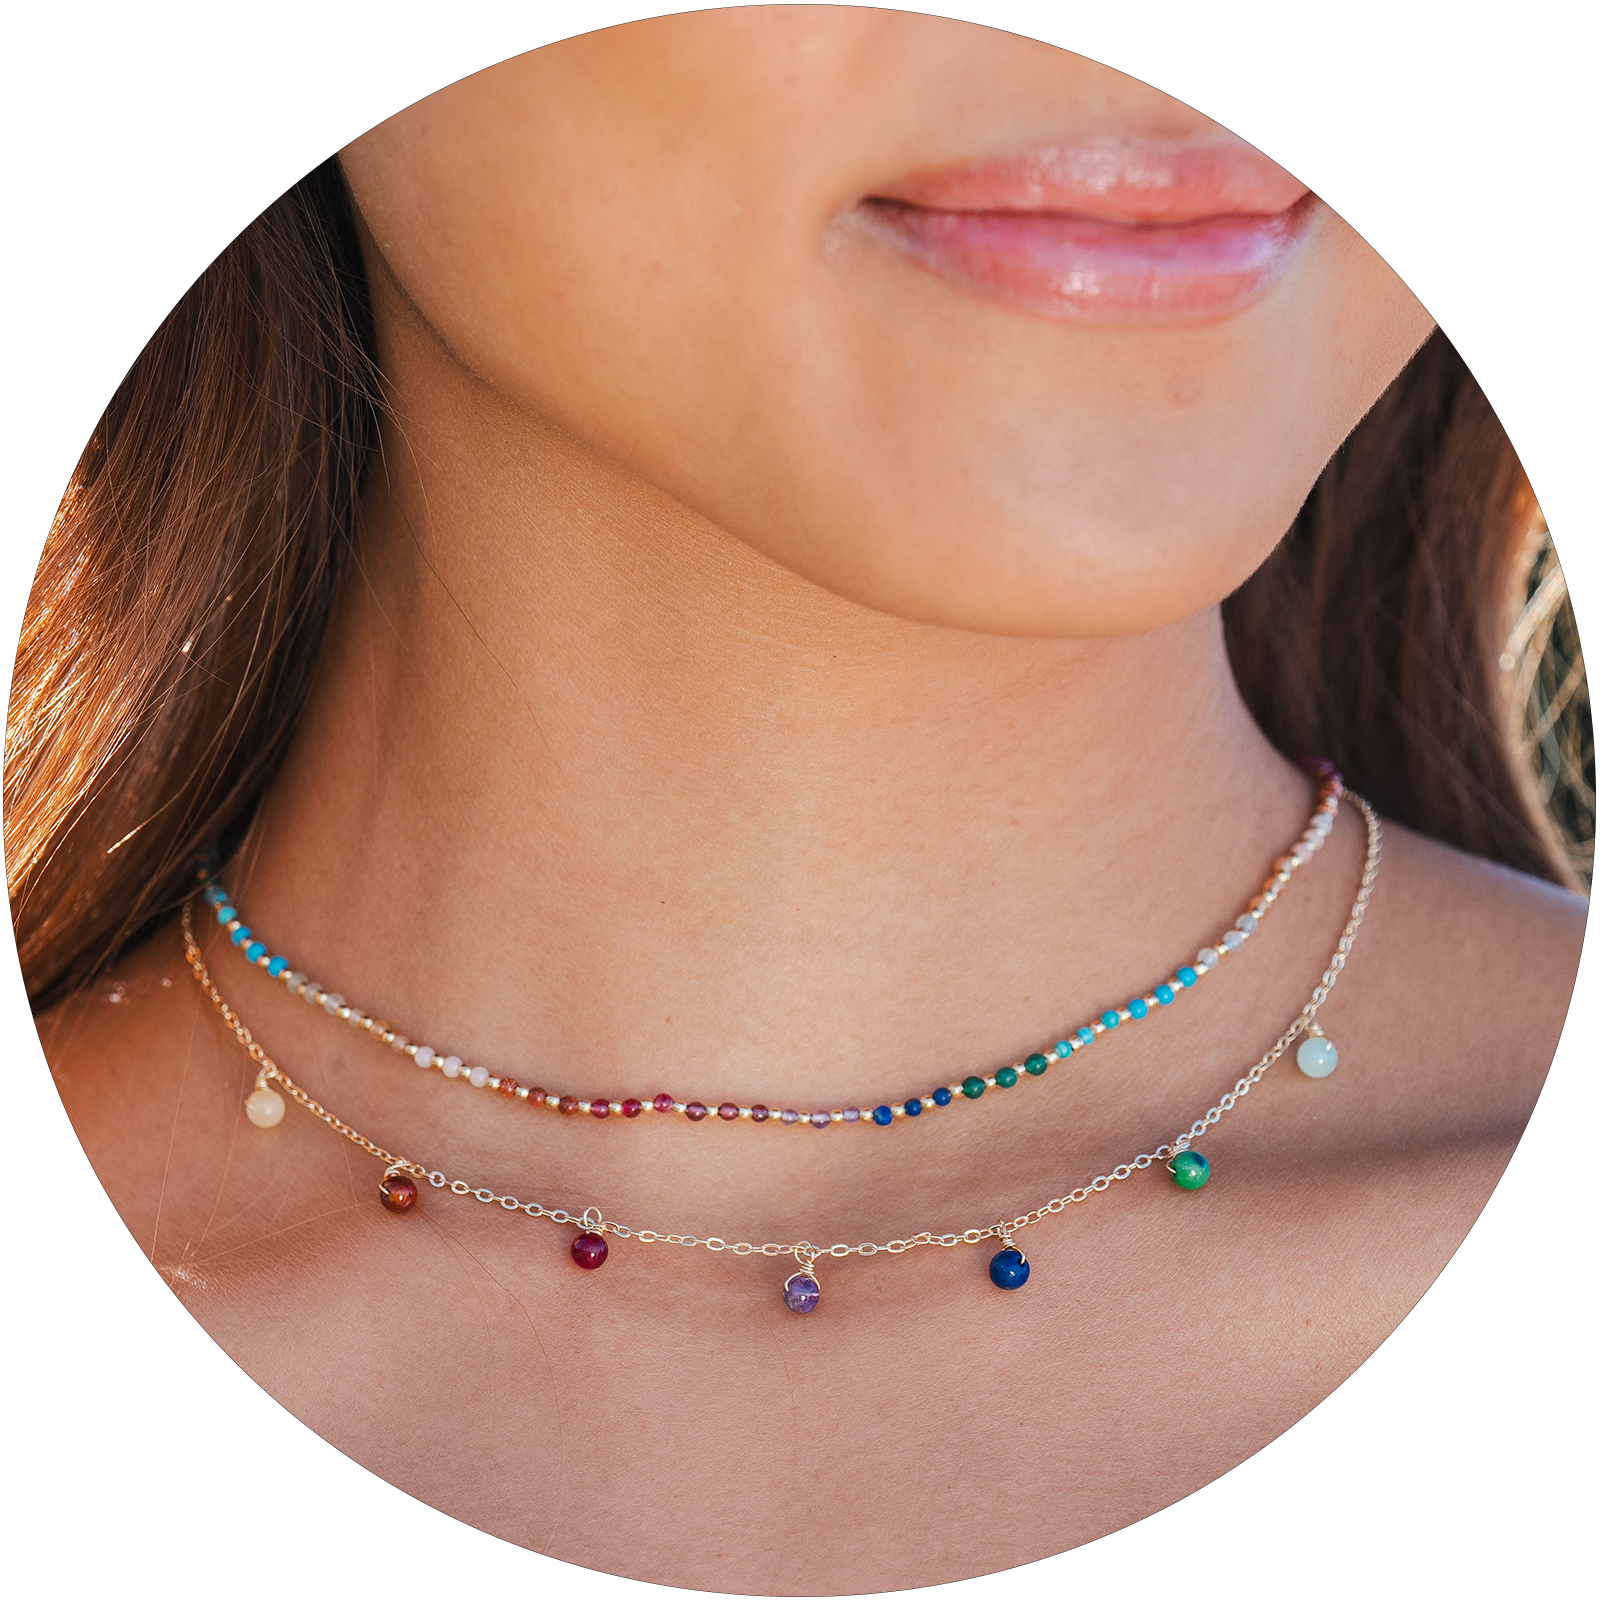 Model wearing a healing necklace stack. The necklaces include a 2mm multicolor stone and gold bead healing necklace and a multicolor stone dewdrop charm gold chain necklace